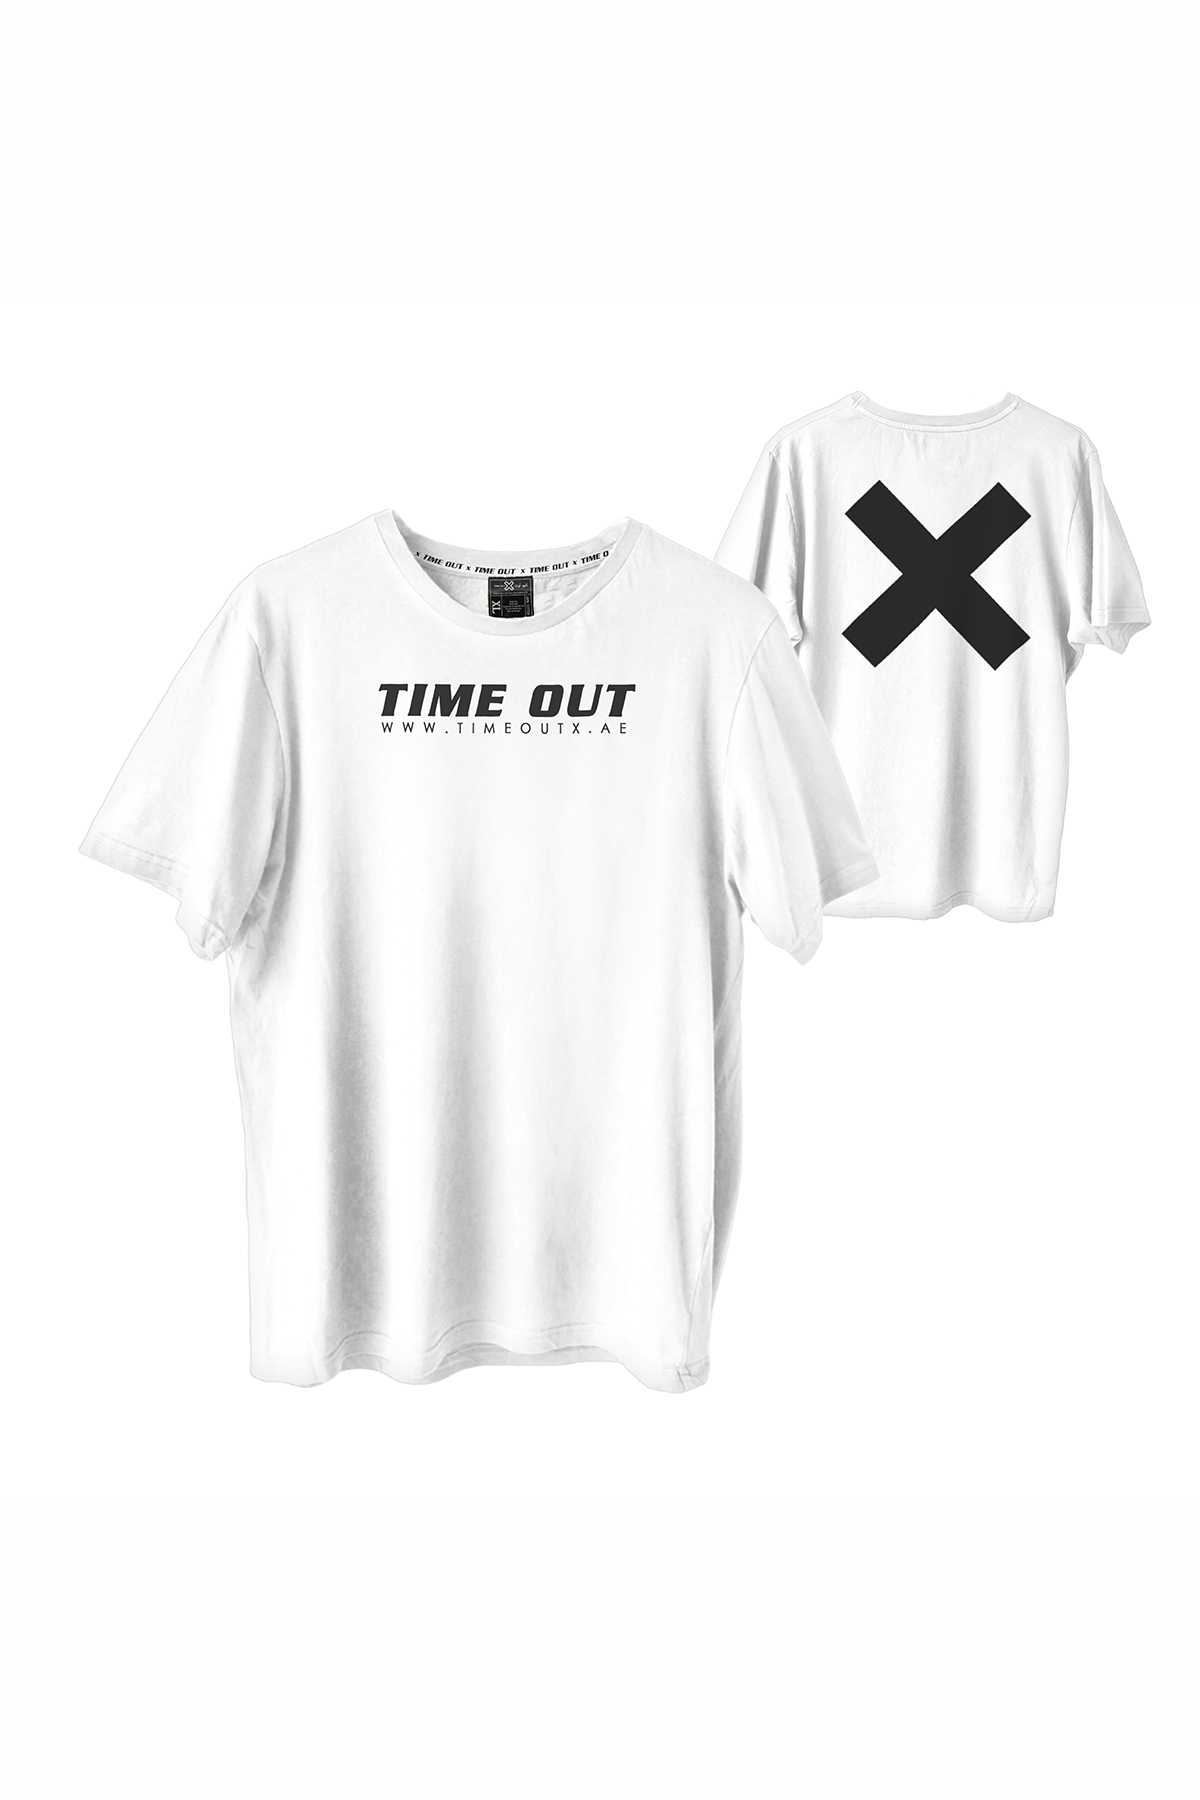 Time-Out-X-Signature-White-Cotton-X-Print-T-Shirt—Front-and-Back